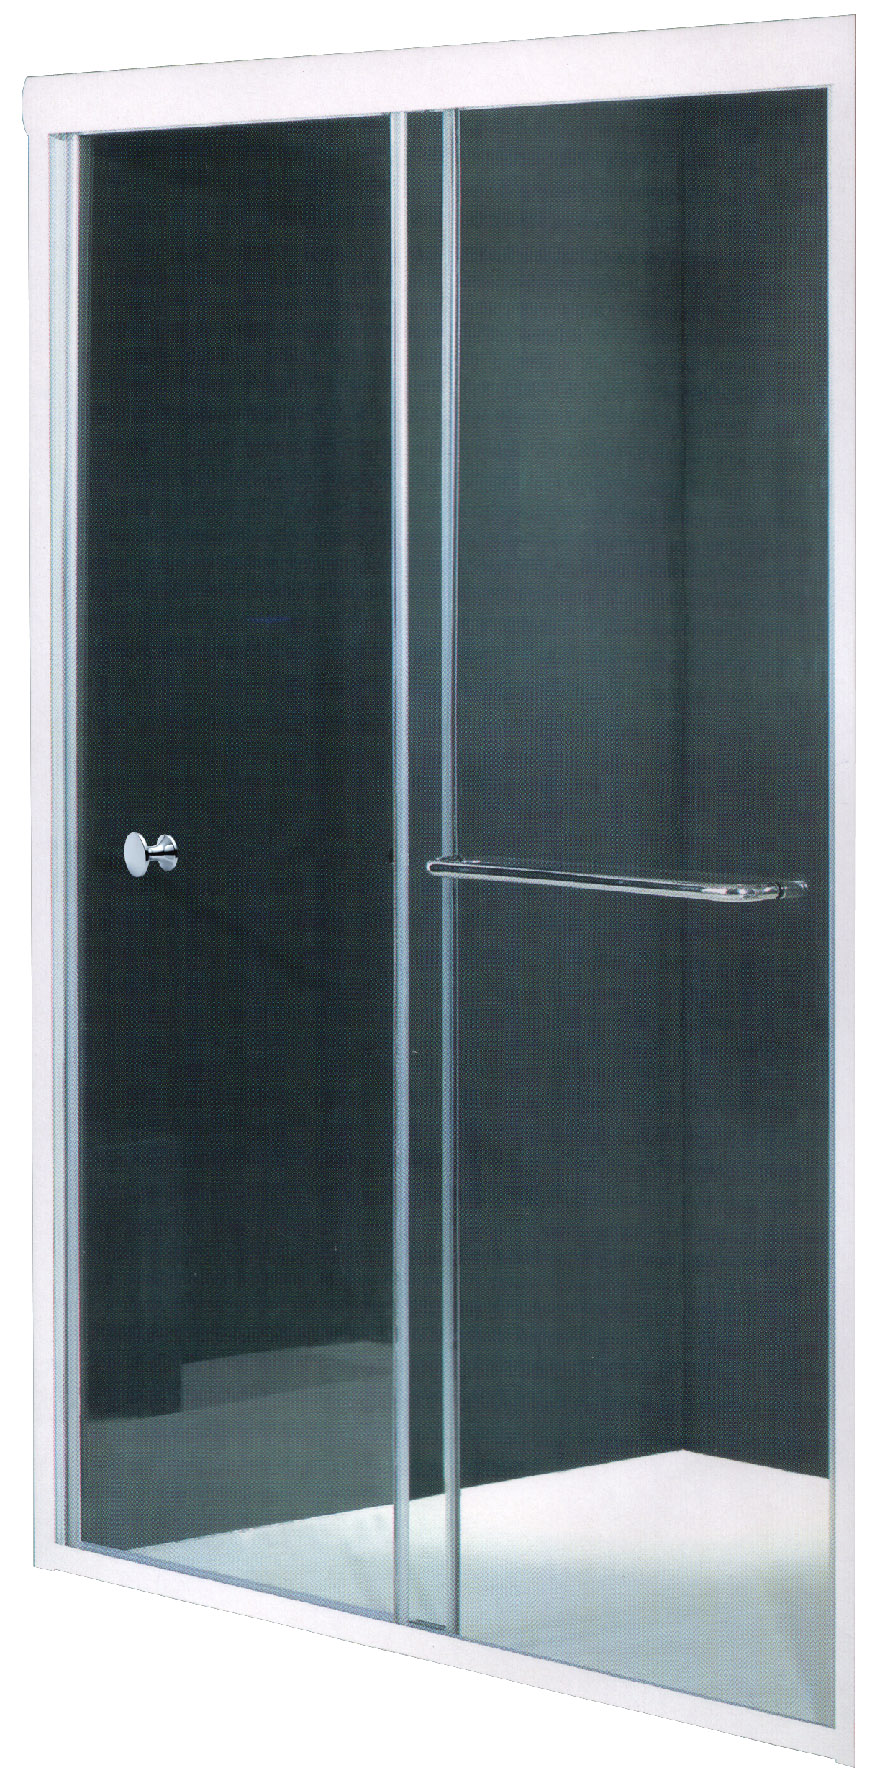 ROMA WALL TO WALL SHOWER CUBICLE SL/G 100-105X185CM 6MM CHROME FRAME/CLEAR GLASS